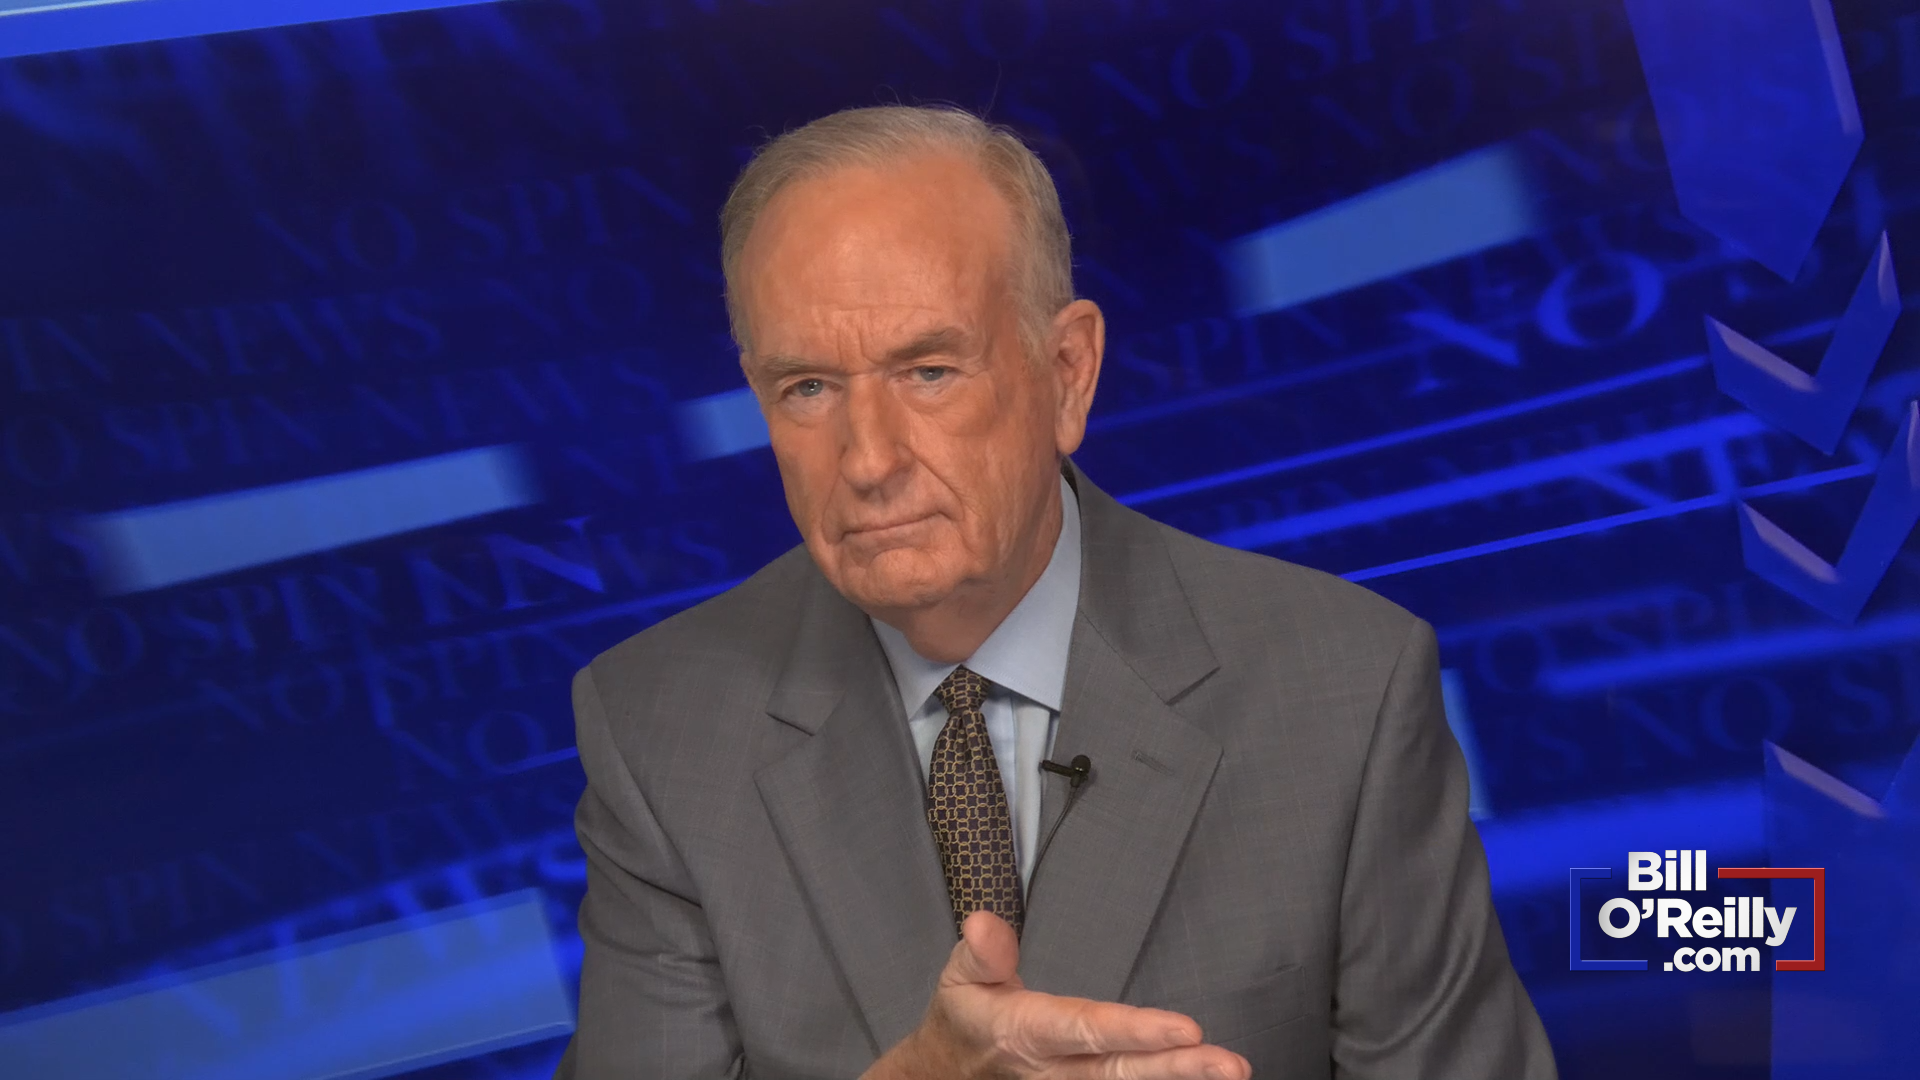 O'Reilly: 'You Cannot Vote For Joe Biden!'